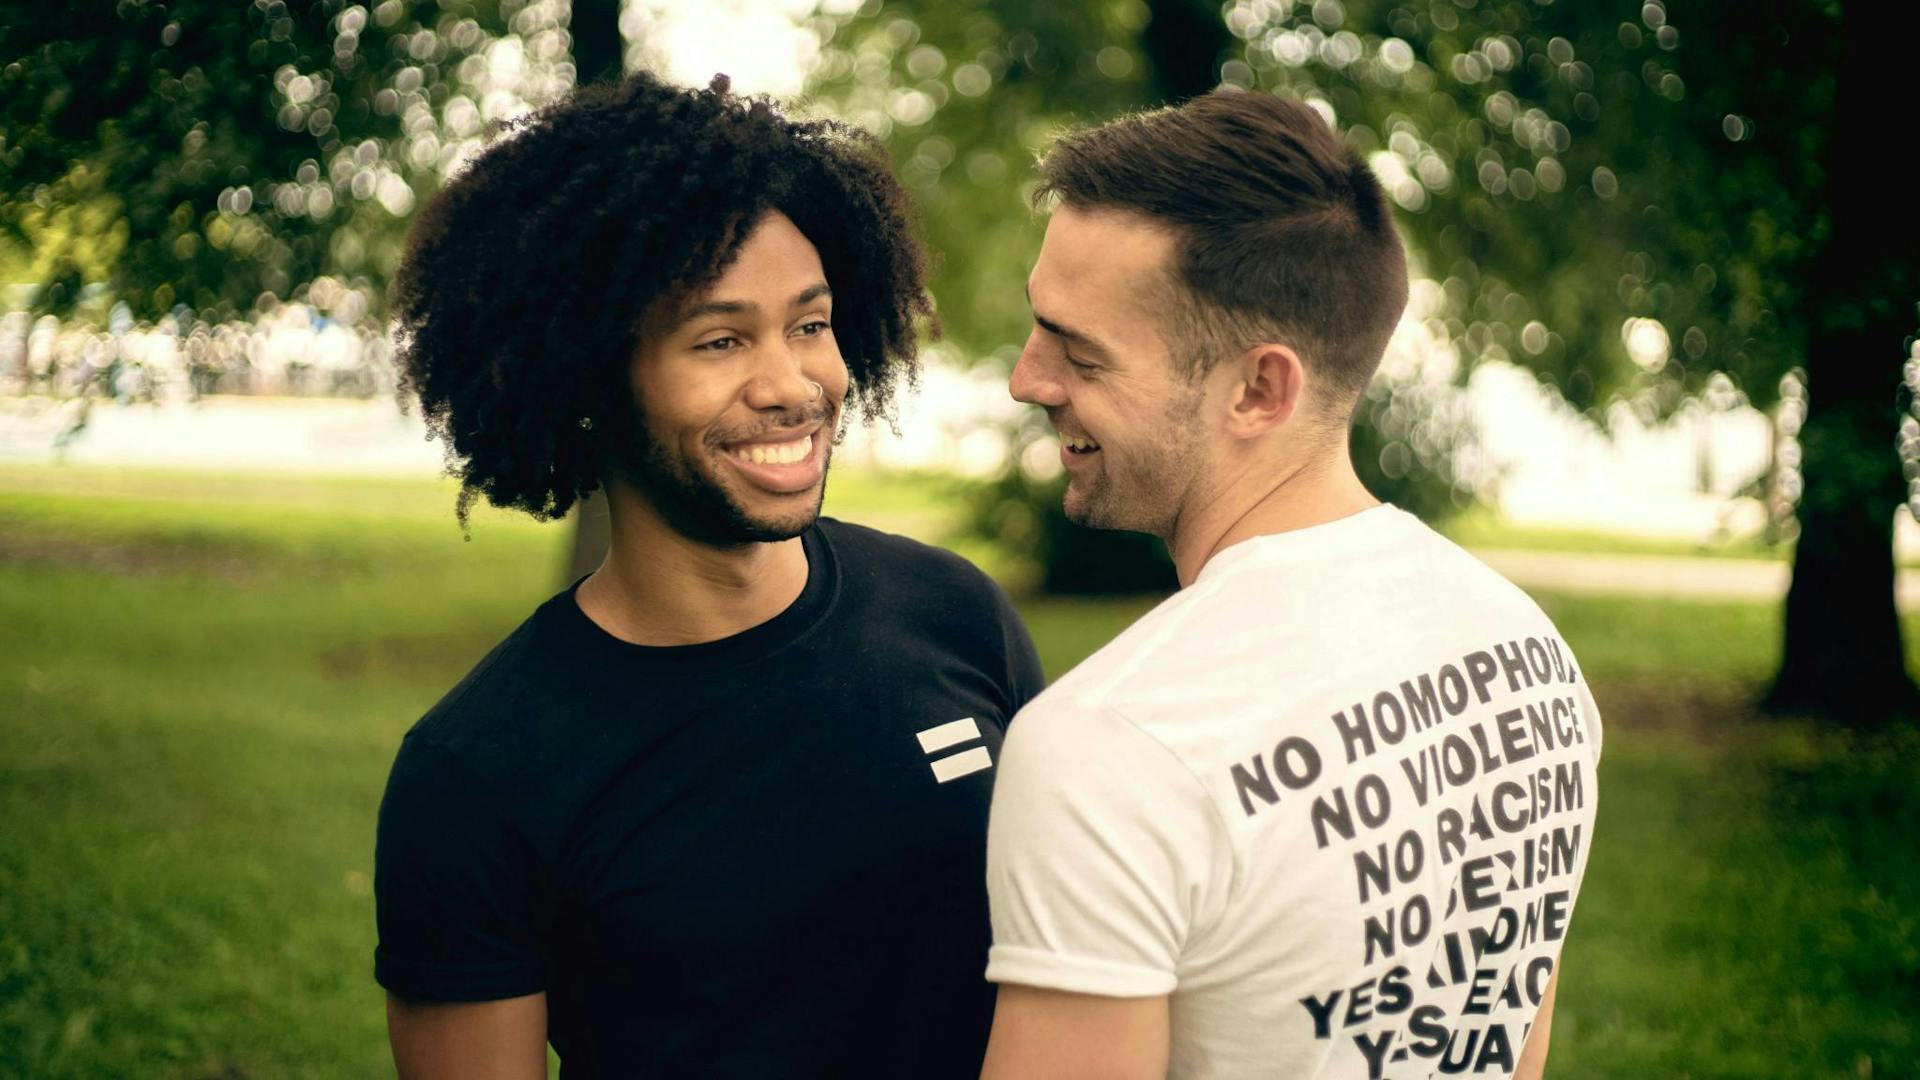 Photo of two guys smiling at each other